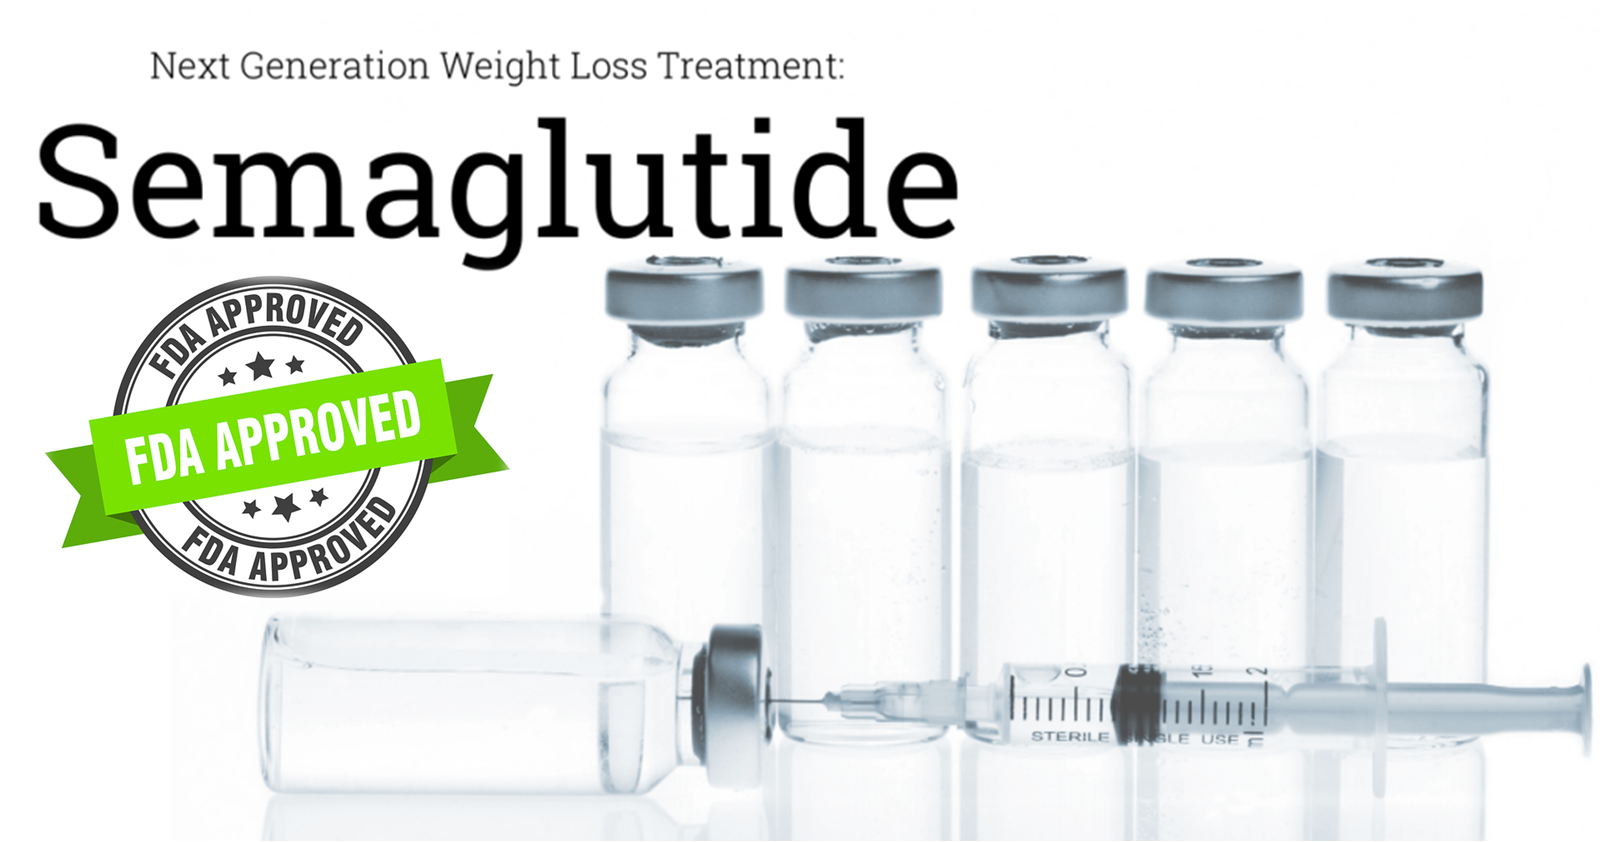 A Game-Changer: FDA Approves Semaglutide for Weight Loss